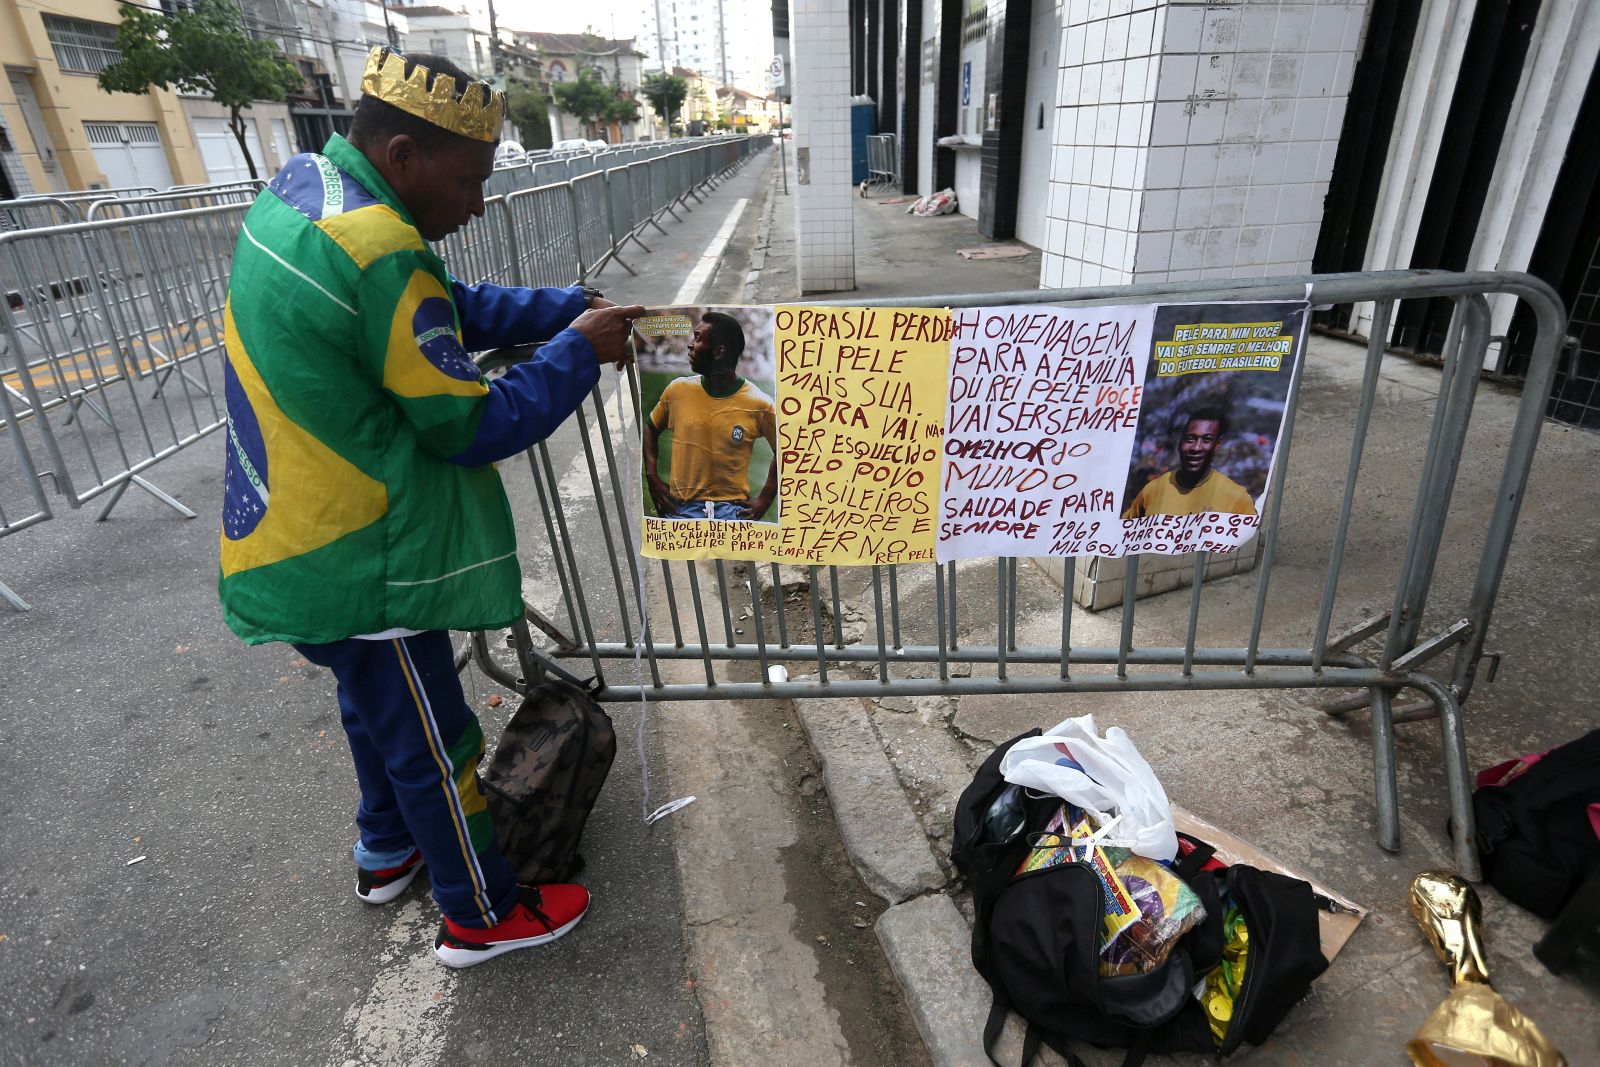 epa10385838 Fans arrive to wait in line for the wake of soccer legend Pele, at the Vila Belmiro stadium in the city of Santos, Brazil, 01 January 2023. Santos was advancing  in the preparations for Pelé's wake, scheduled for next Monday, four days after the death of the legendary Brazilian soccer player. The grass of the Vila Belmiro stadium, in the city of Santos, already has two white tents installed to receive the thousands of fans who wish to say goodbye to the 'King' of football.  EPA/GUILHERME DIONIZIO